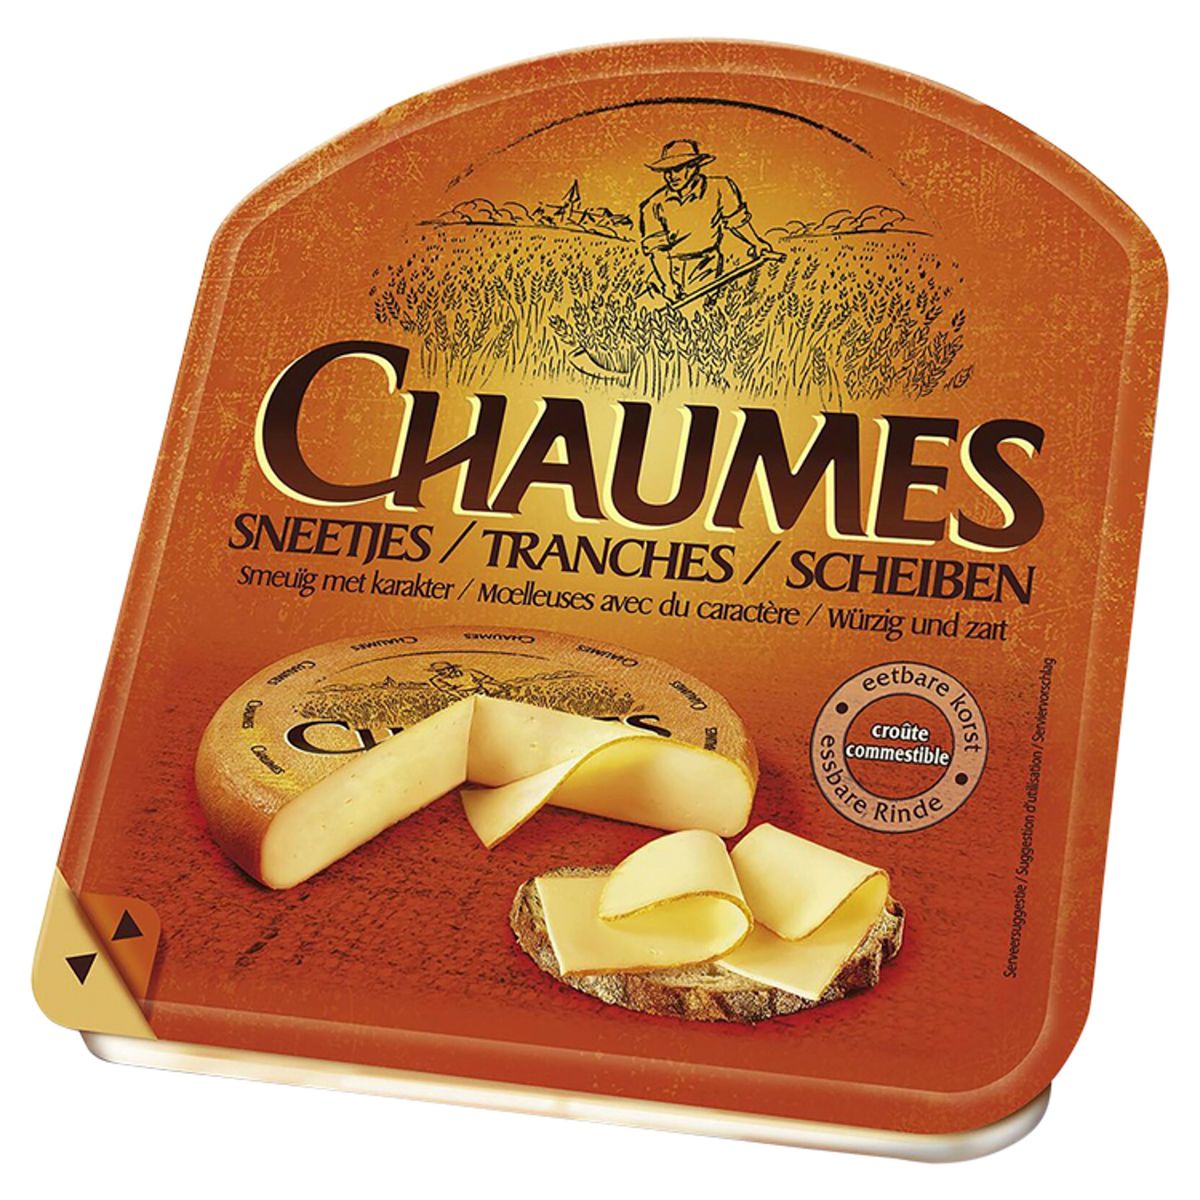 Chaumes Tranches 150 g